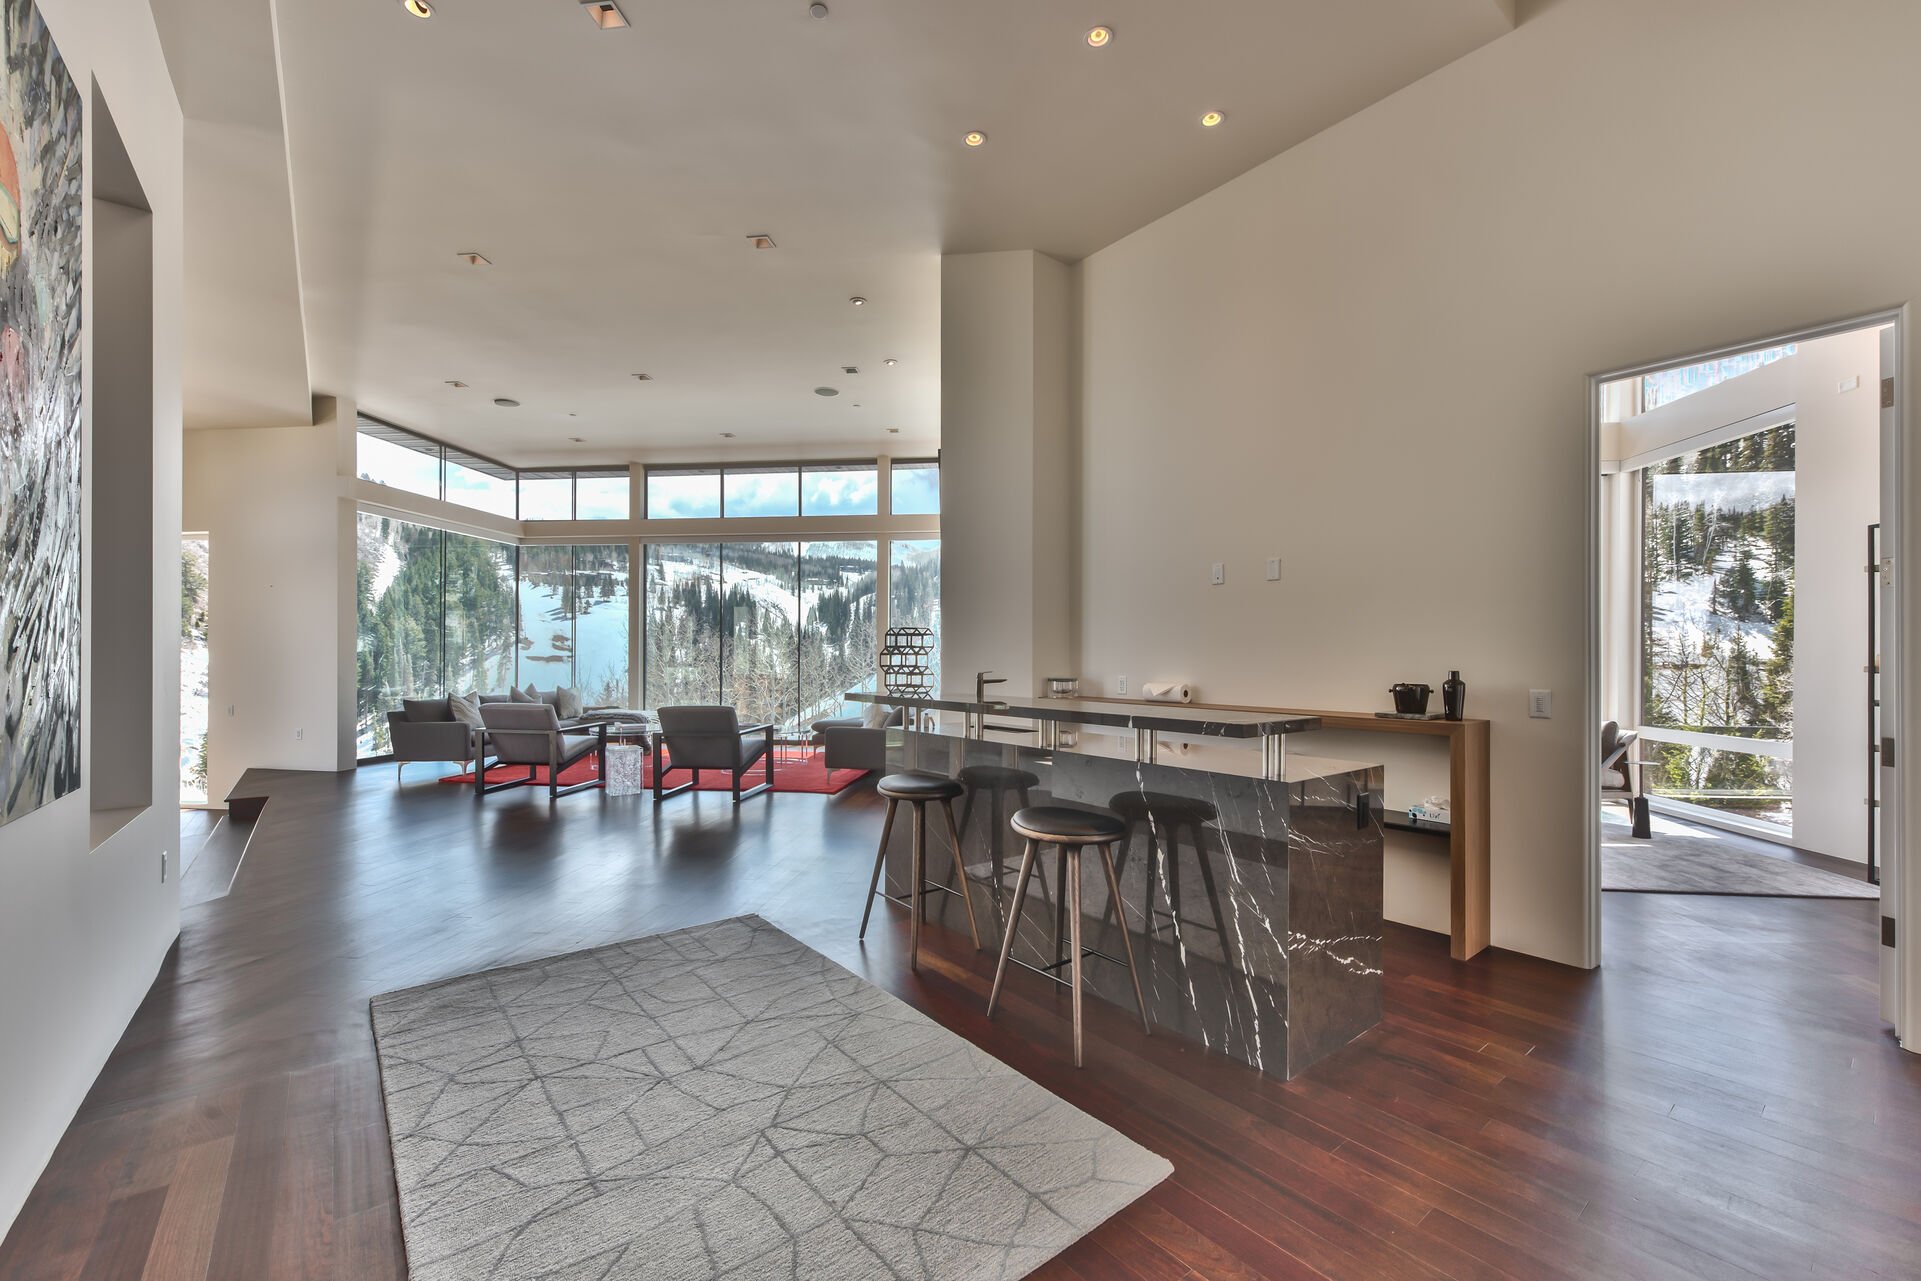 Enter into this Stunning Home Featuring Modern Decor, Hardwood Floors, Impressive Artwork, and Breathtaking Views Throughout